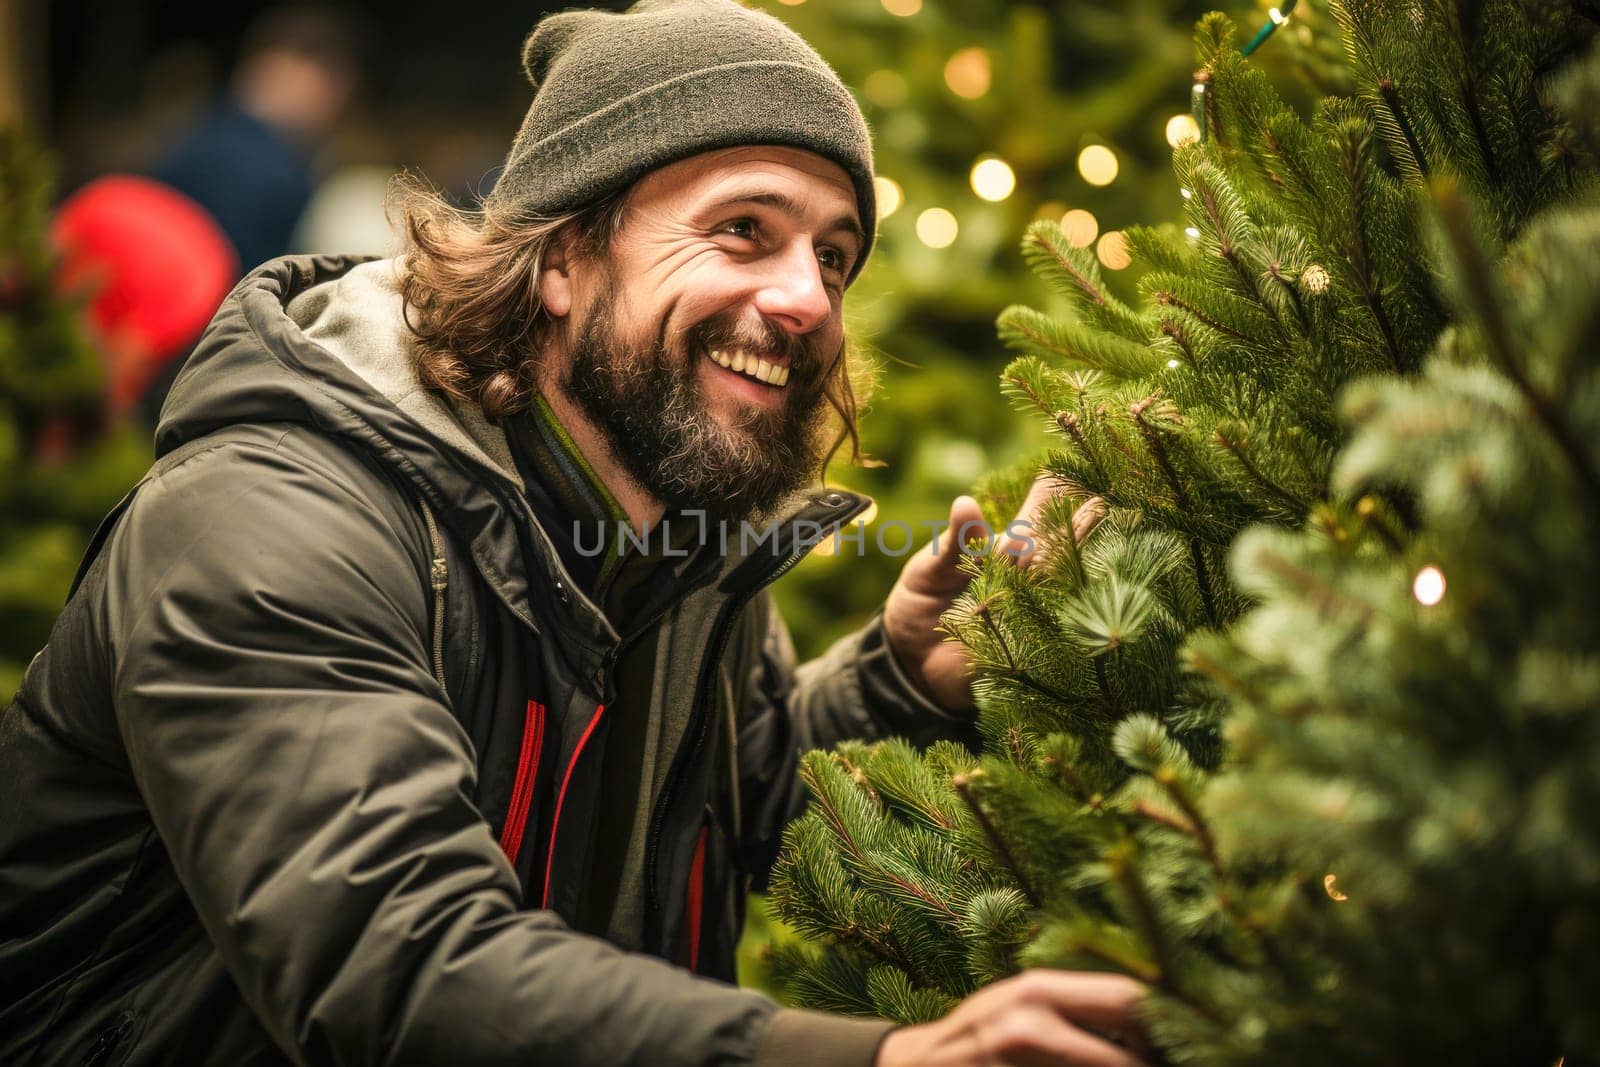 A man is looking for a Christmas tree at the Christmas tree market by Yurich32